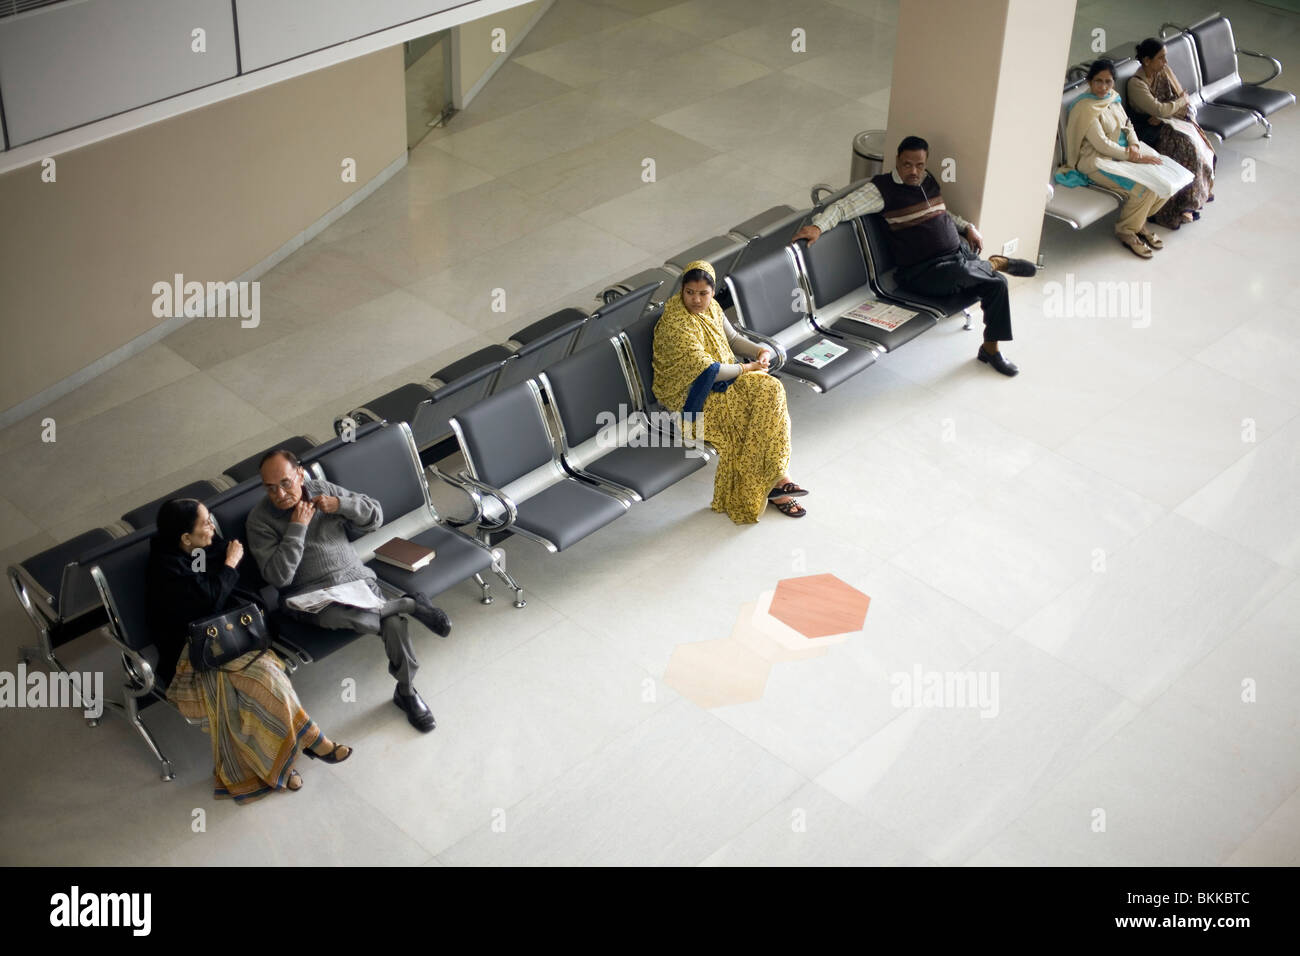 Patients wait in a waiting area at the Medicity Hospital, Gurgaon, India Stock Photo